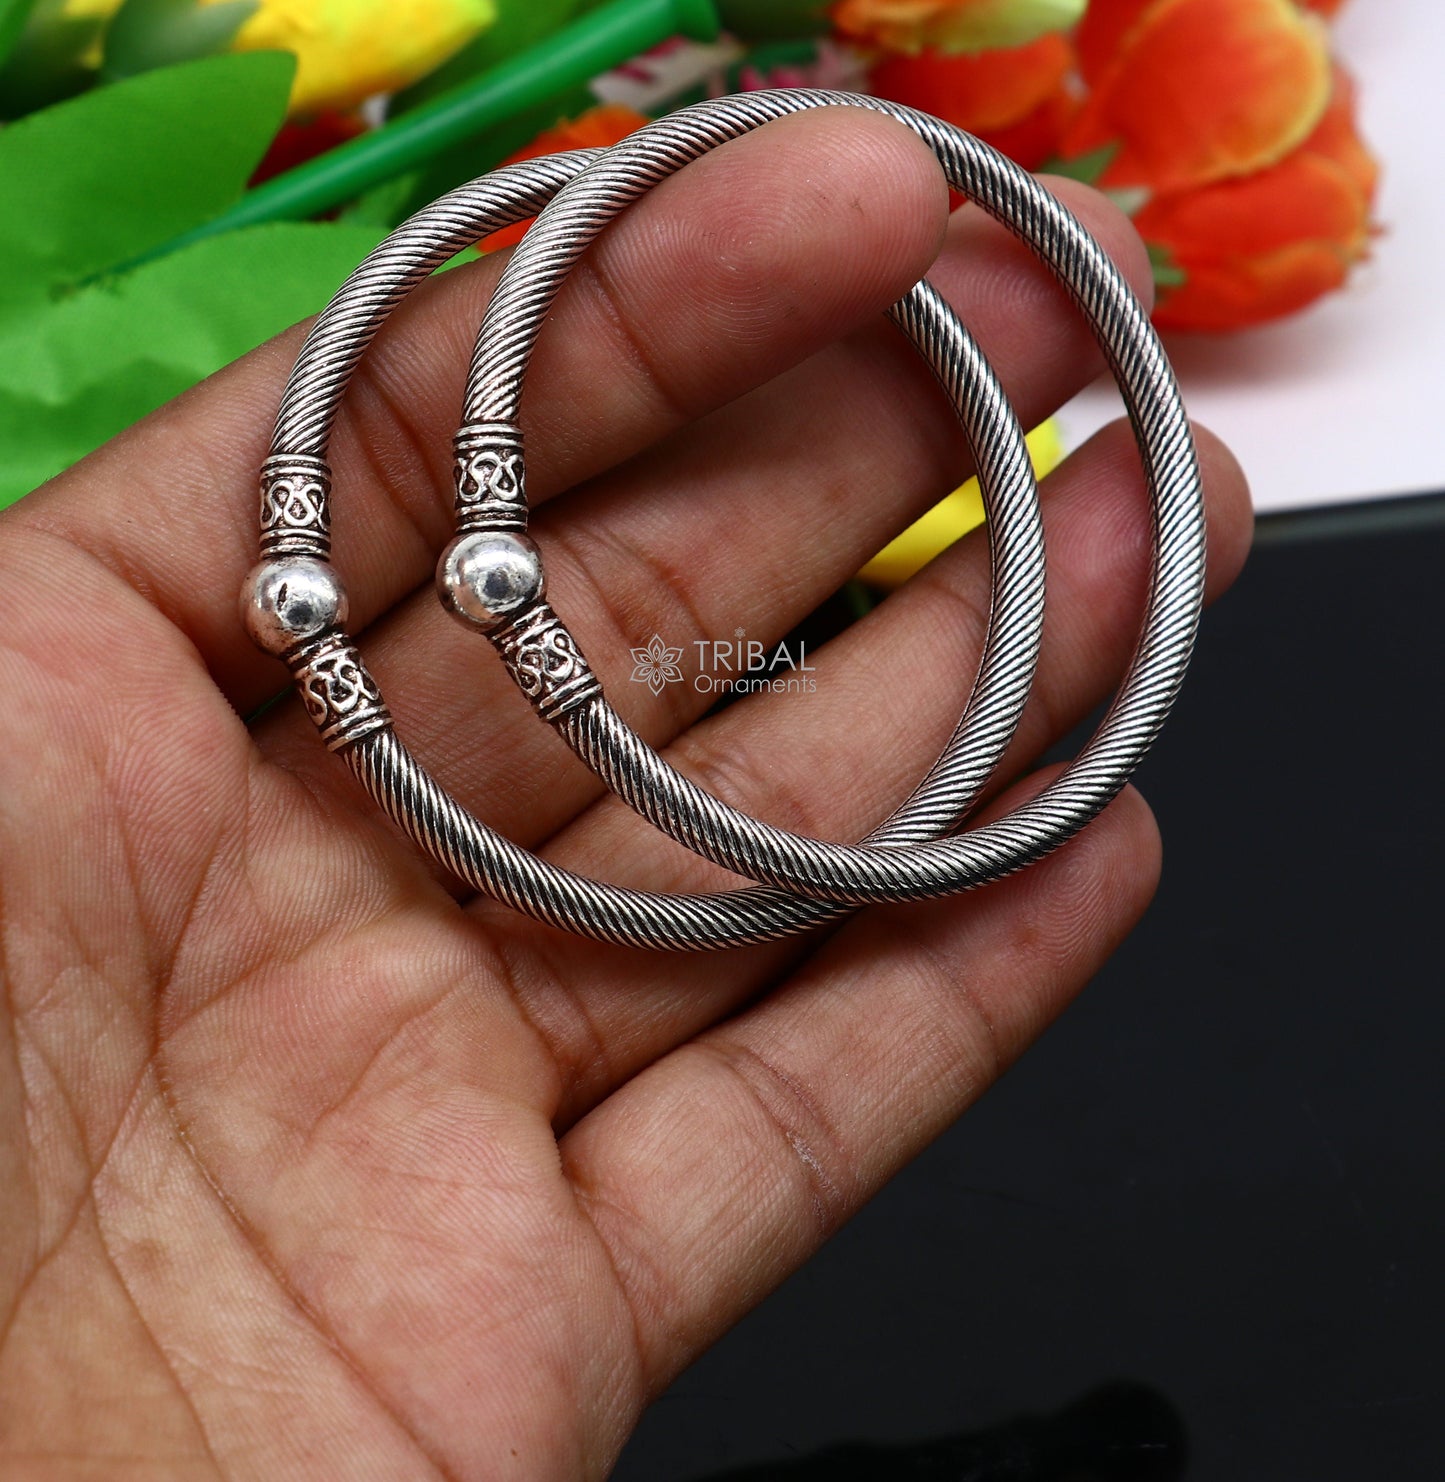 925 sterling silver handmade unique cultural design trendy kada bracelet for men's and girl's, best delicate Light weight jewelry nsk665 - TRIBAL ORNAMENTS